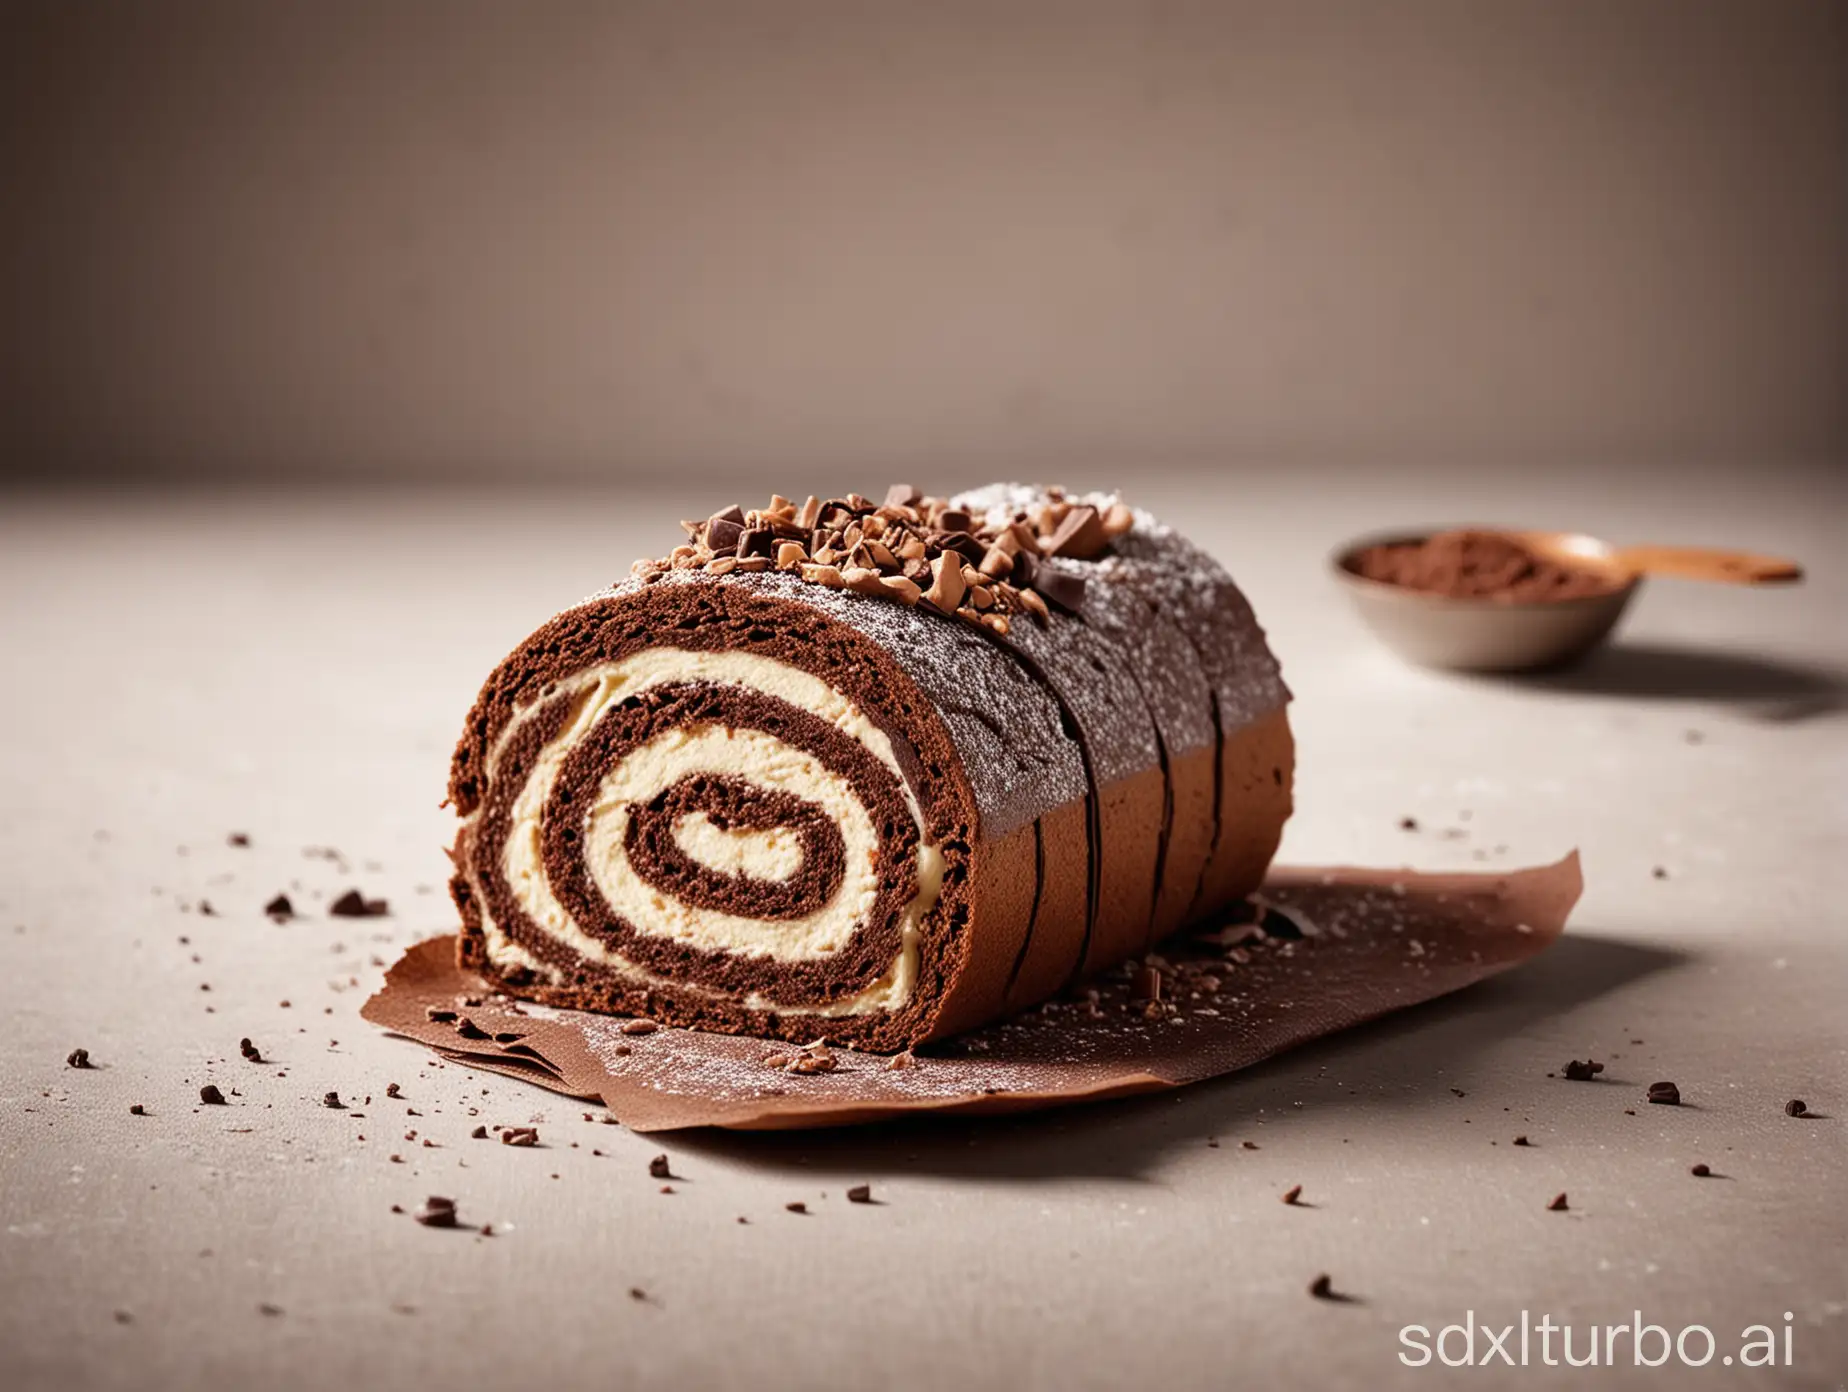 Delicious-Chocolate-Cream-Swiss-Roll-in-Magazine-Style-Photography